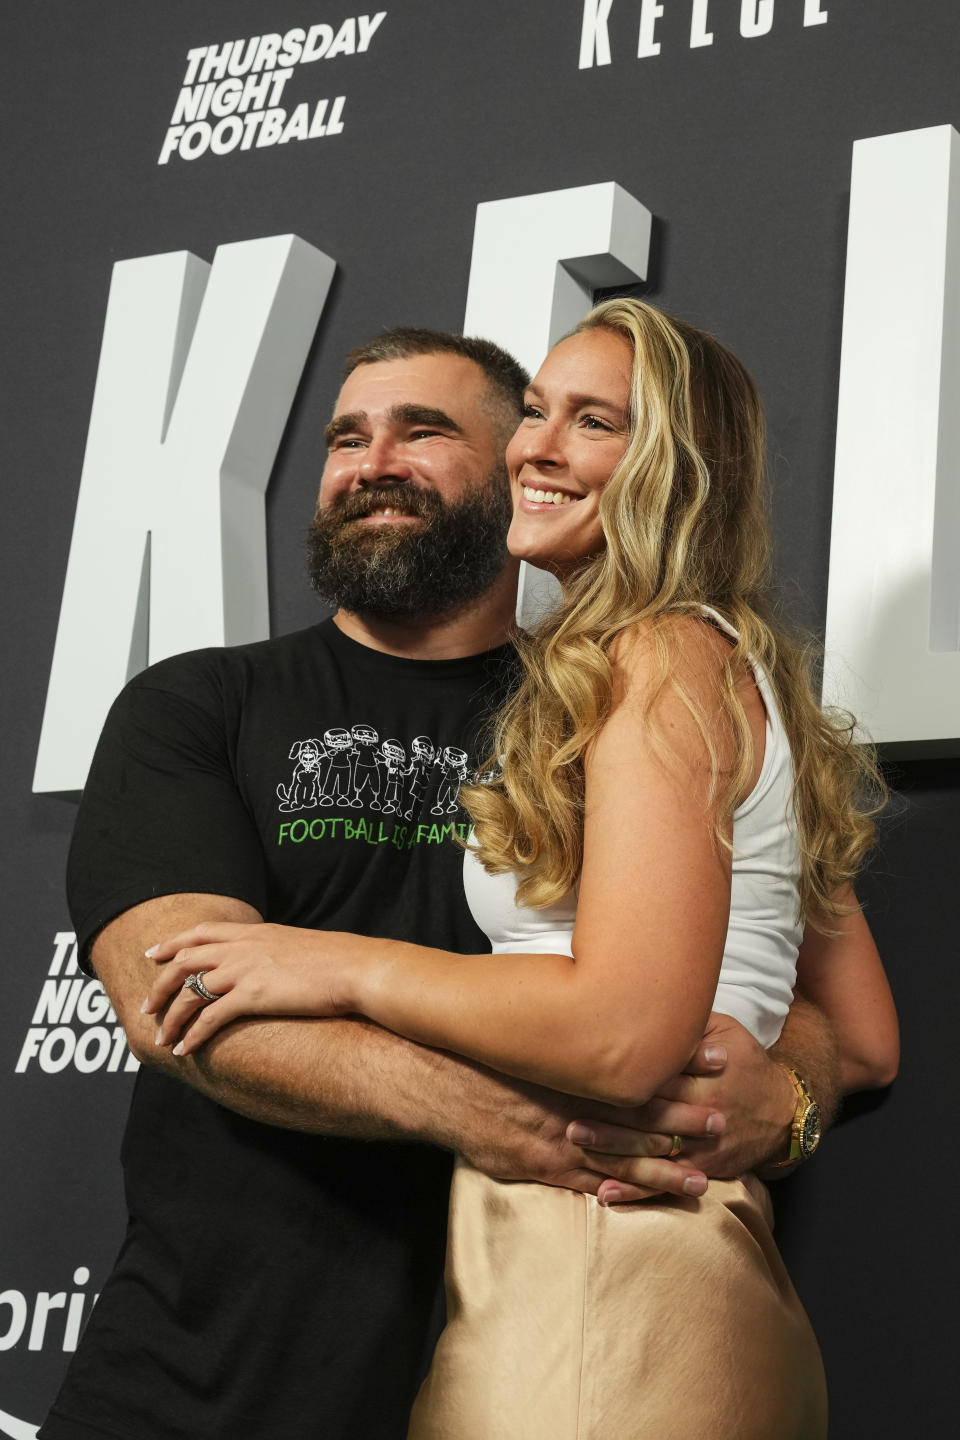 Will Kylie Kelce and Donna Kelce Team Up for a Podcast? Jason Kelce's Wife Weighs In